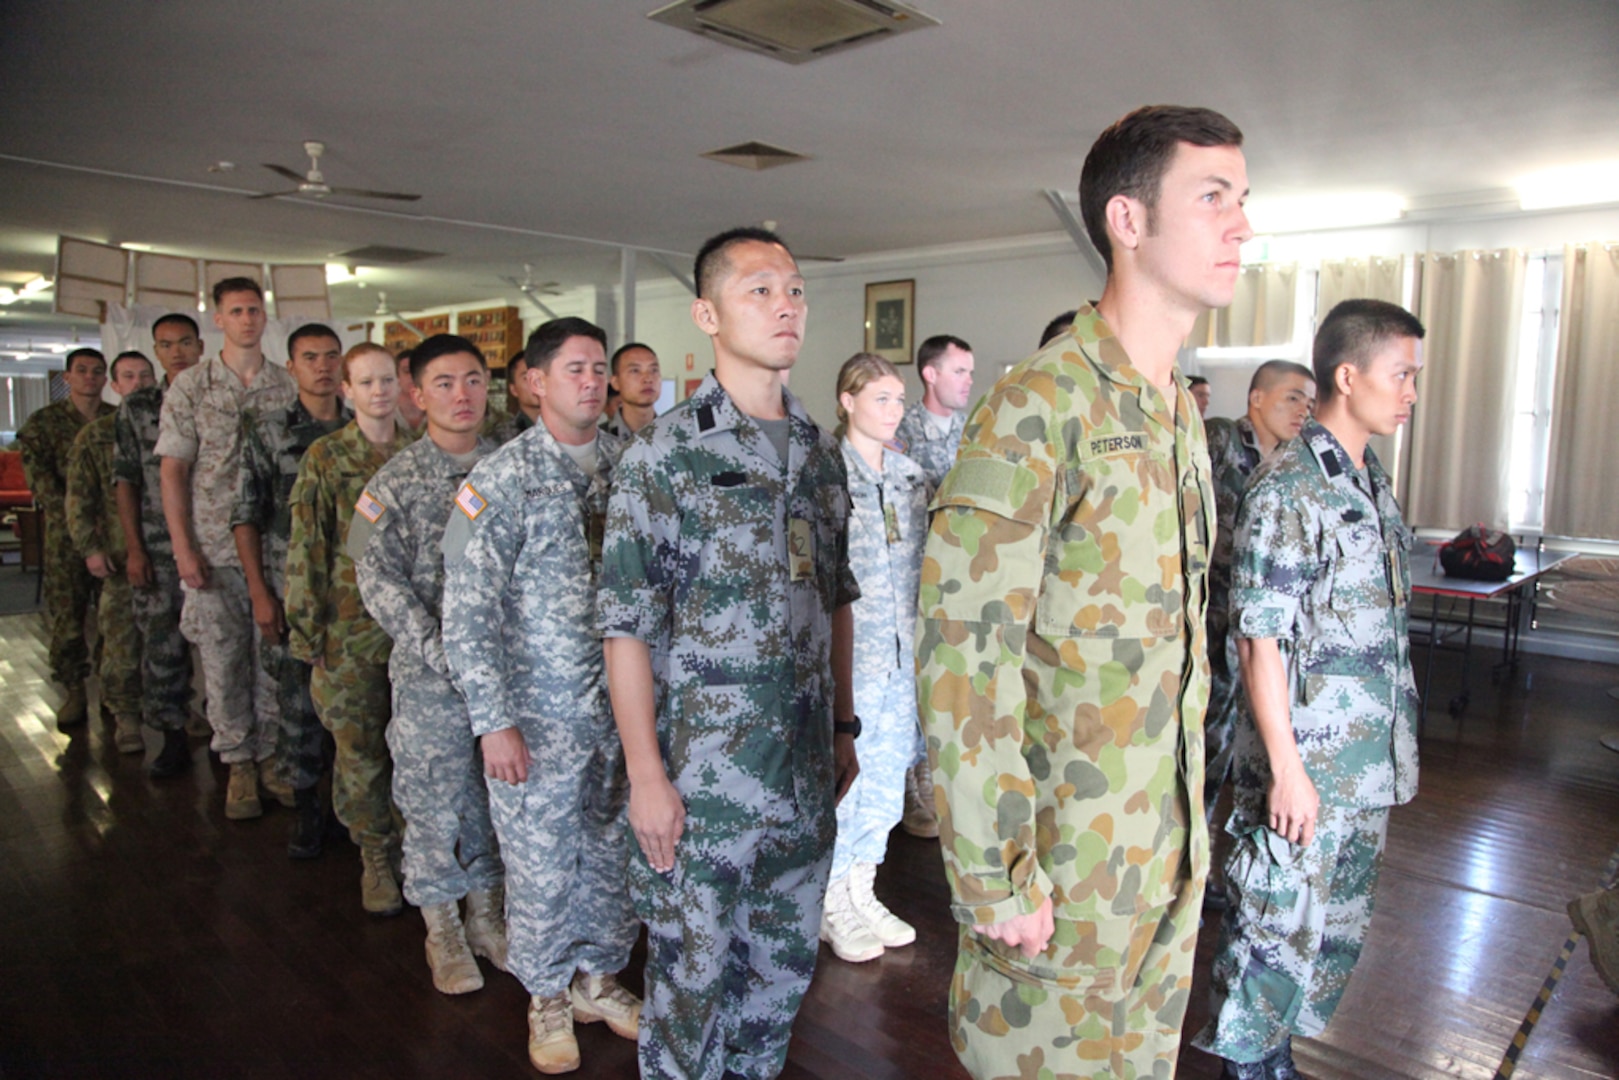 DARWIN, NT, Australia (Aug. 29, 2015) - Participants wait to march out for the opening ceremony Aug. 29 at Larrakeyah Barracks, Darwin, Northern Territory, Australia, before the start of Exercise Kowari 15. Kowari is a trilateral environmental survival training opportunity hosted by Australia and includes forces from Australia, China and the U.S. simultaneously. Environmental survival training in the Australian Outback offers a unique training opportunity in the Pacific. 